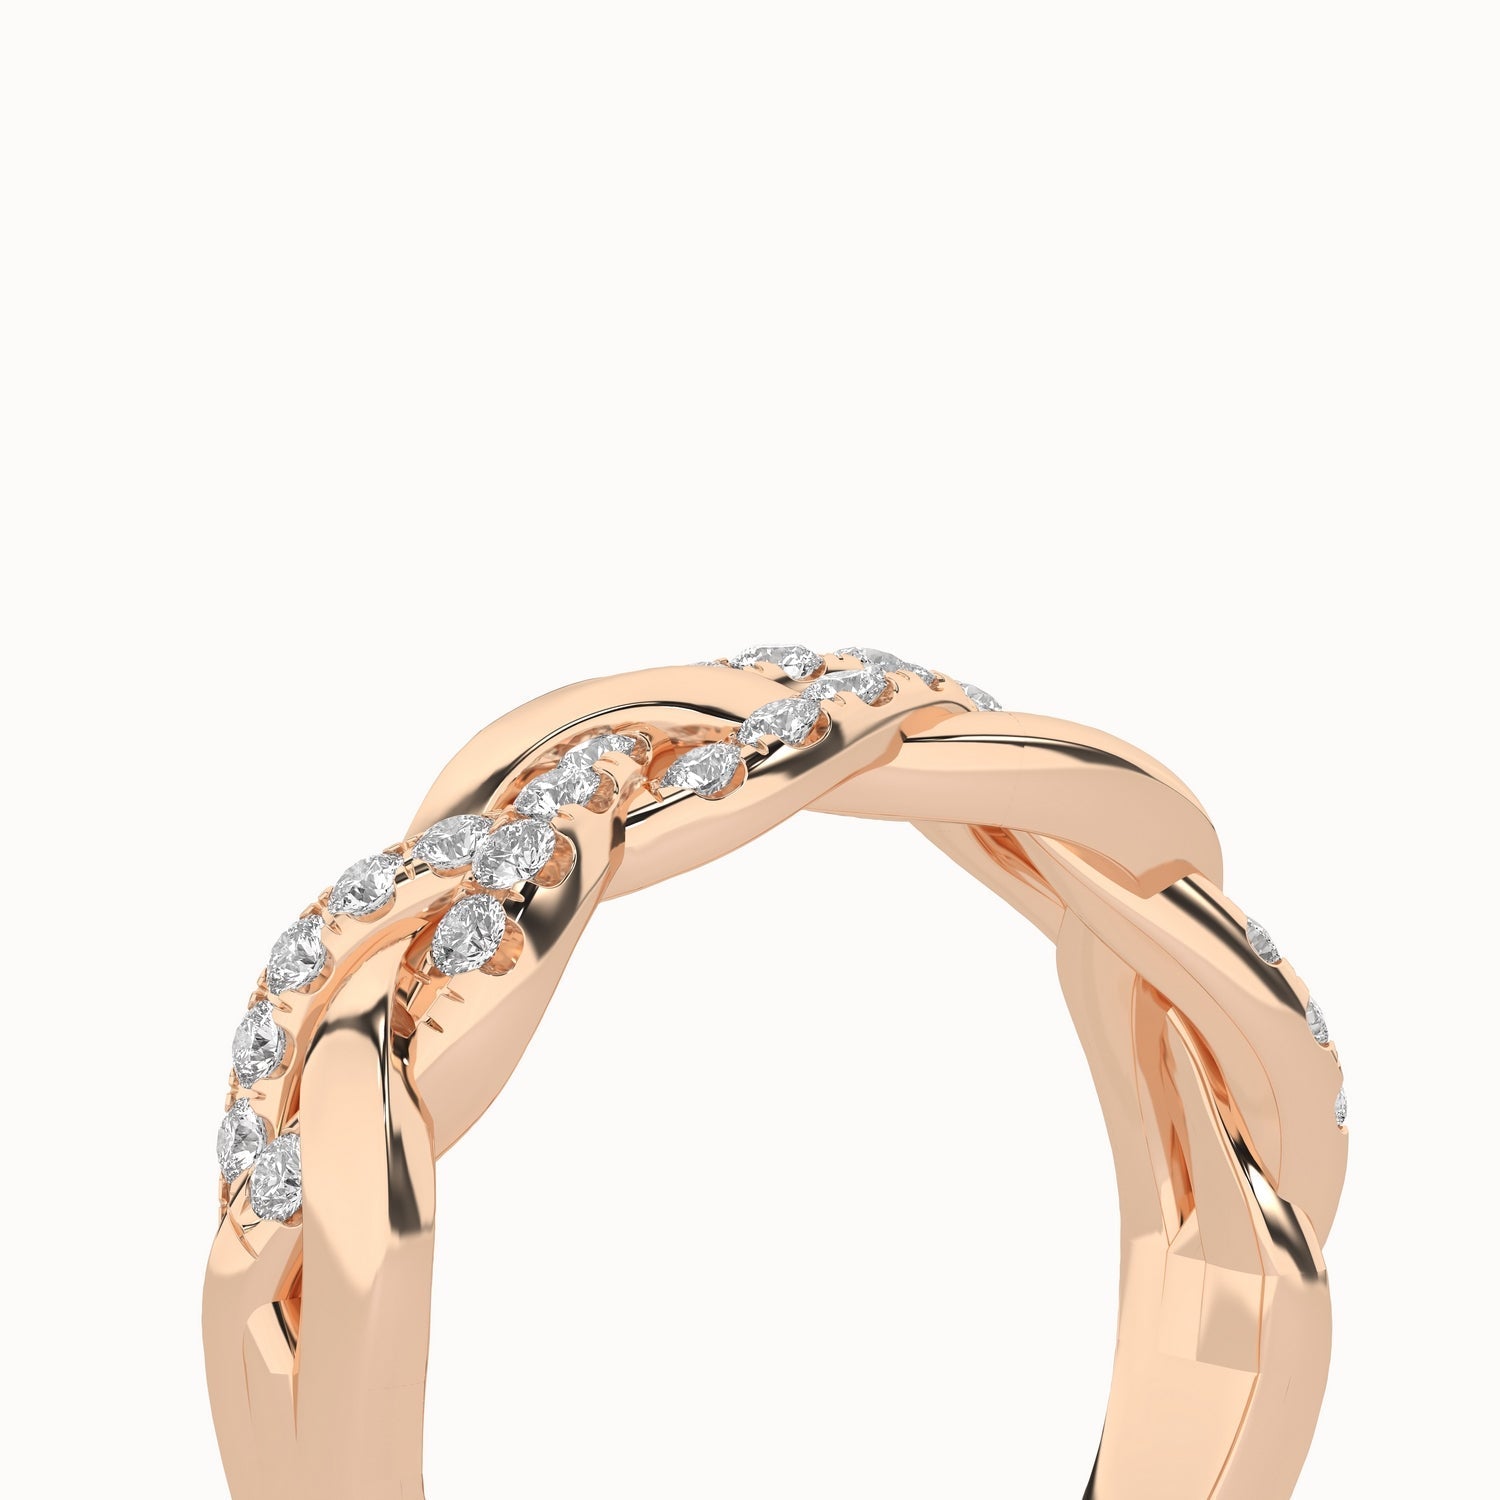 Triple Entwined Braid Ring_Product Angle_1/3Ct - 5